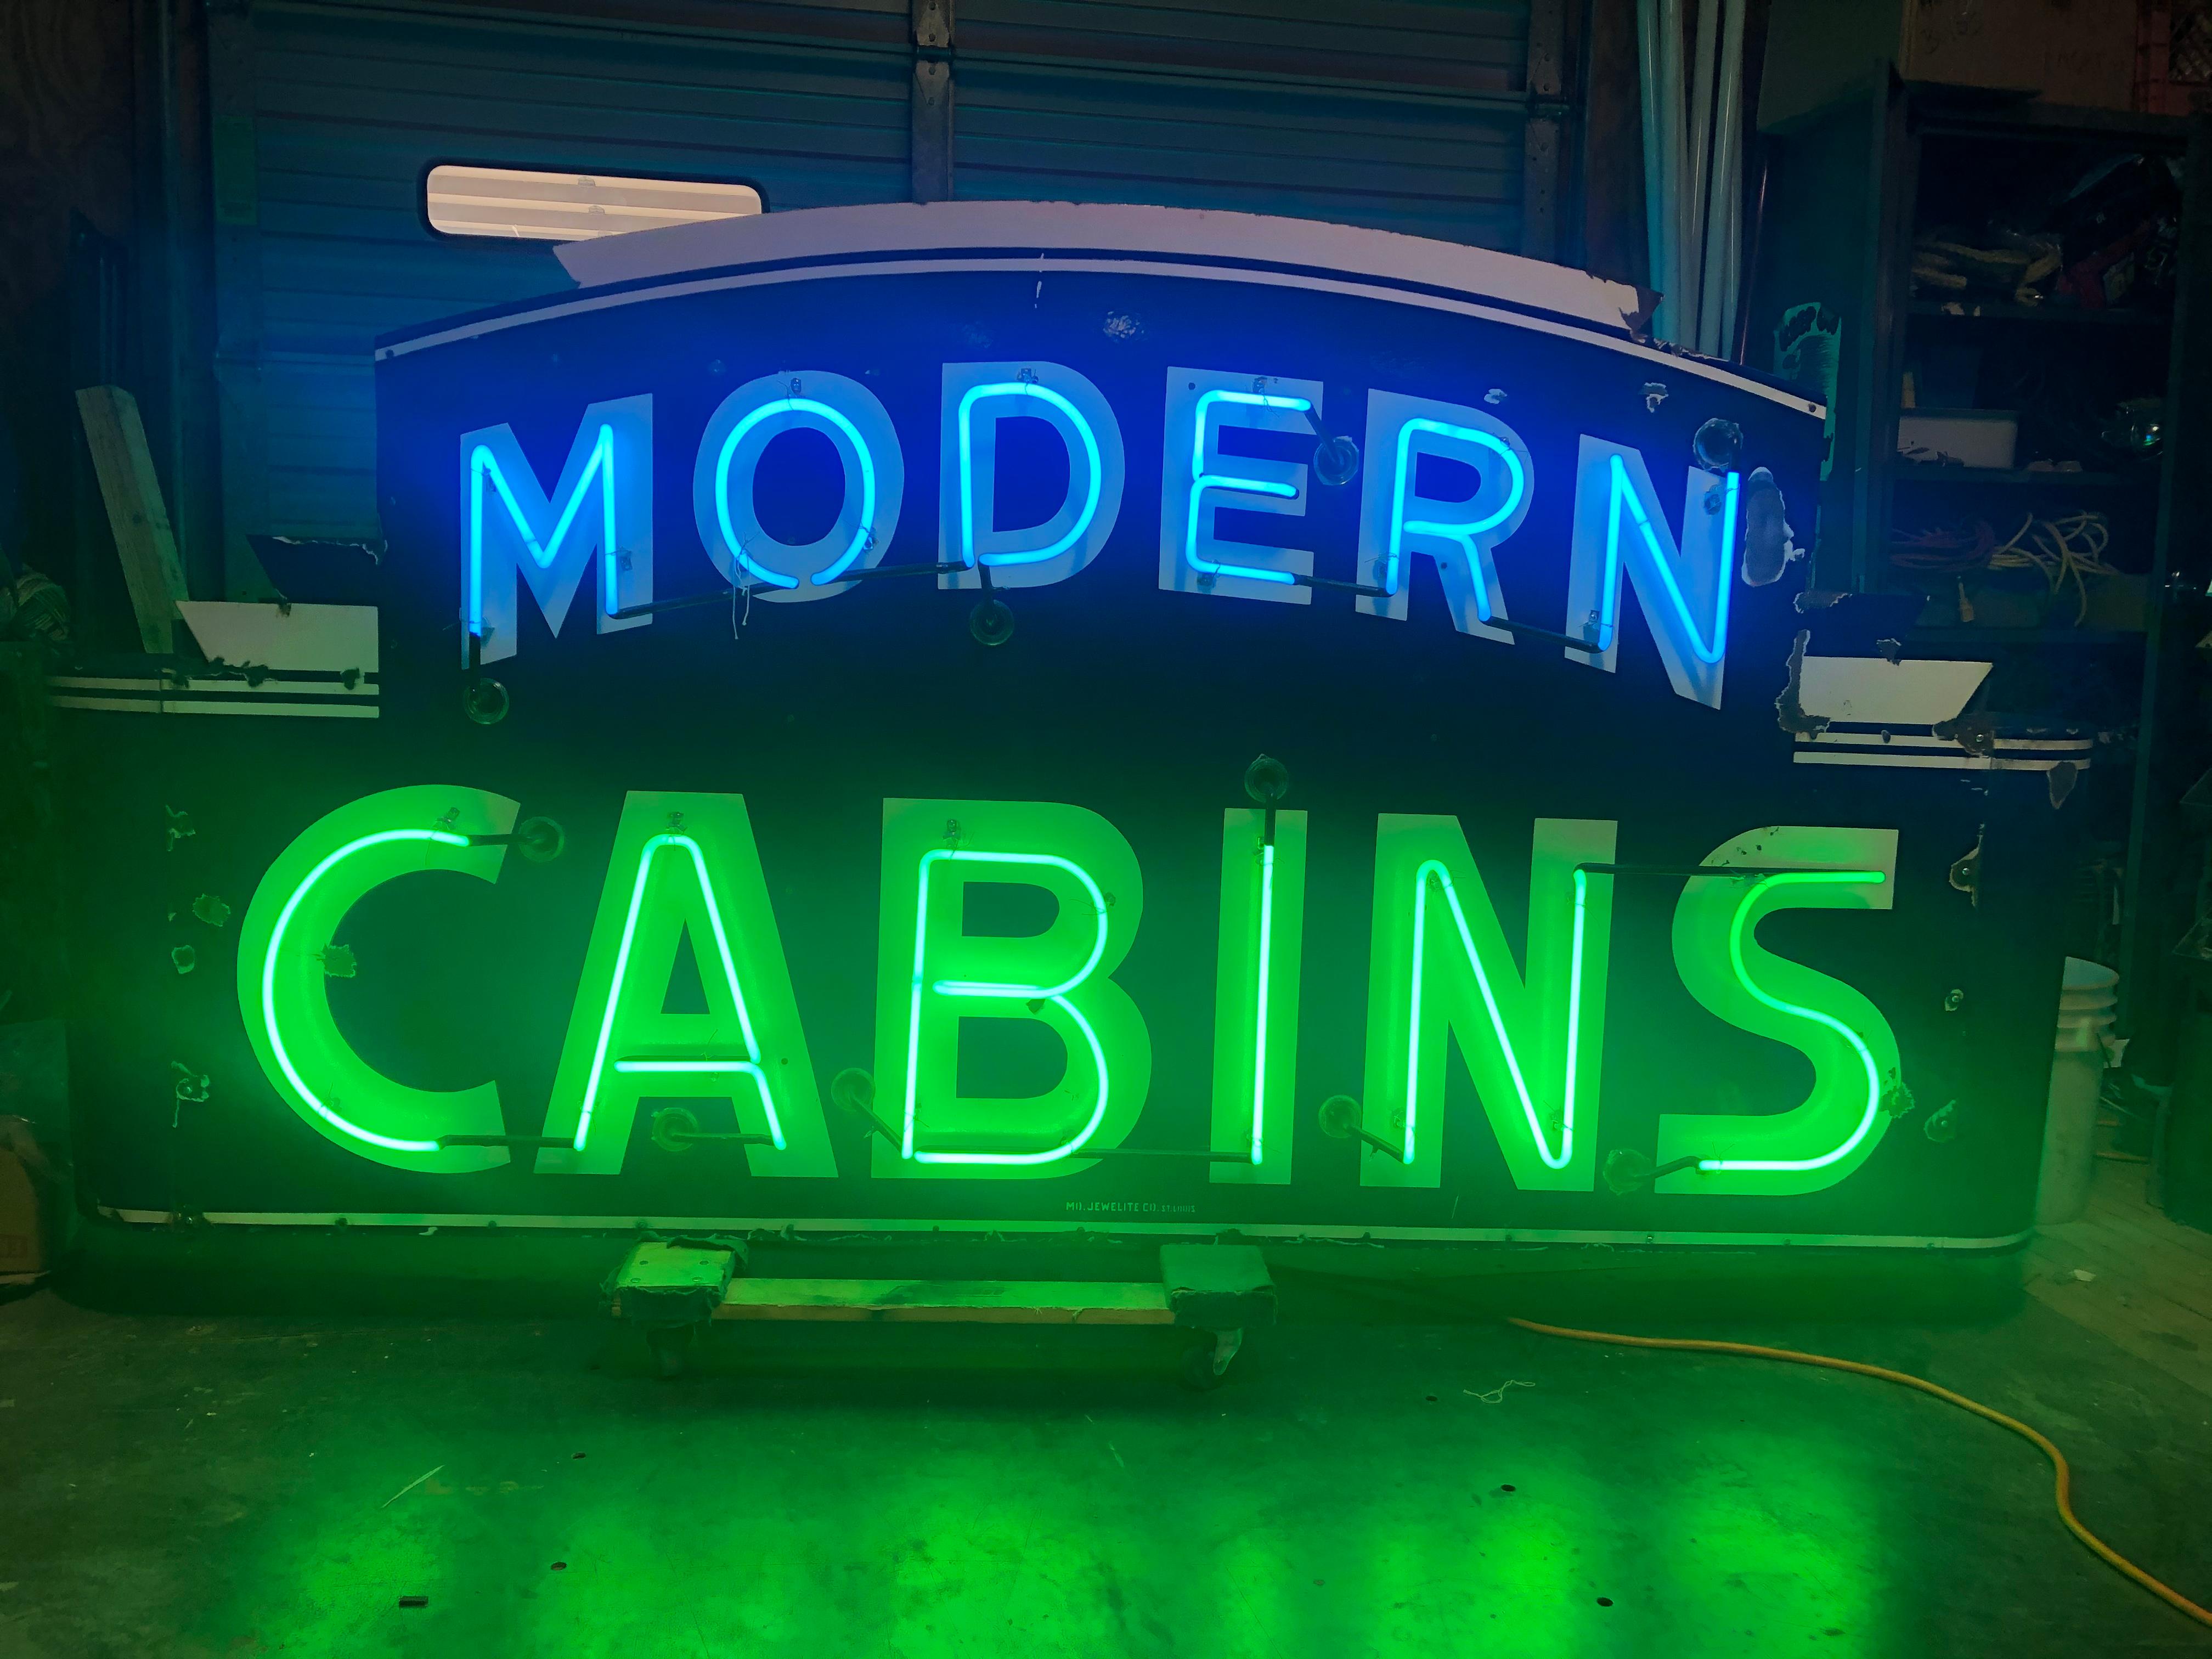 Industrial 1950’s Double Sided Modern Cabins Neon Sign